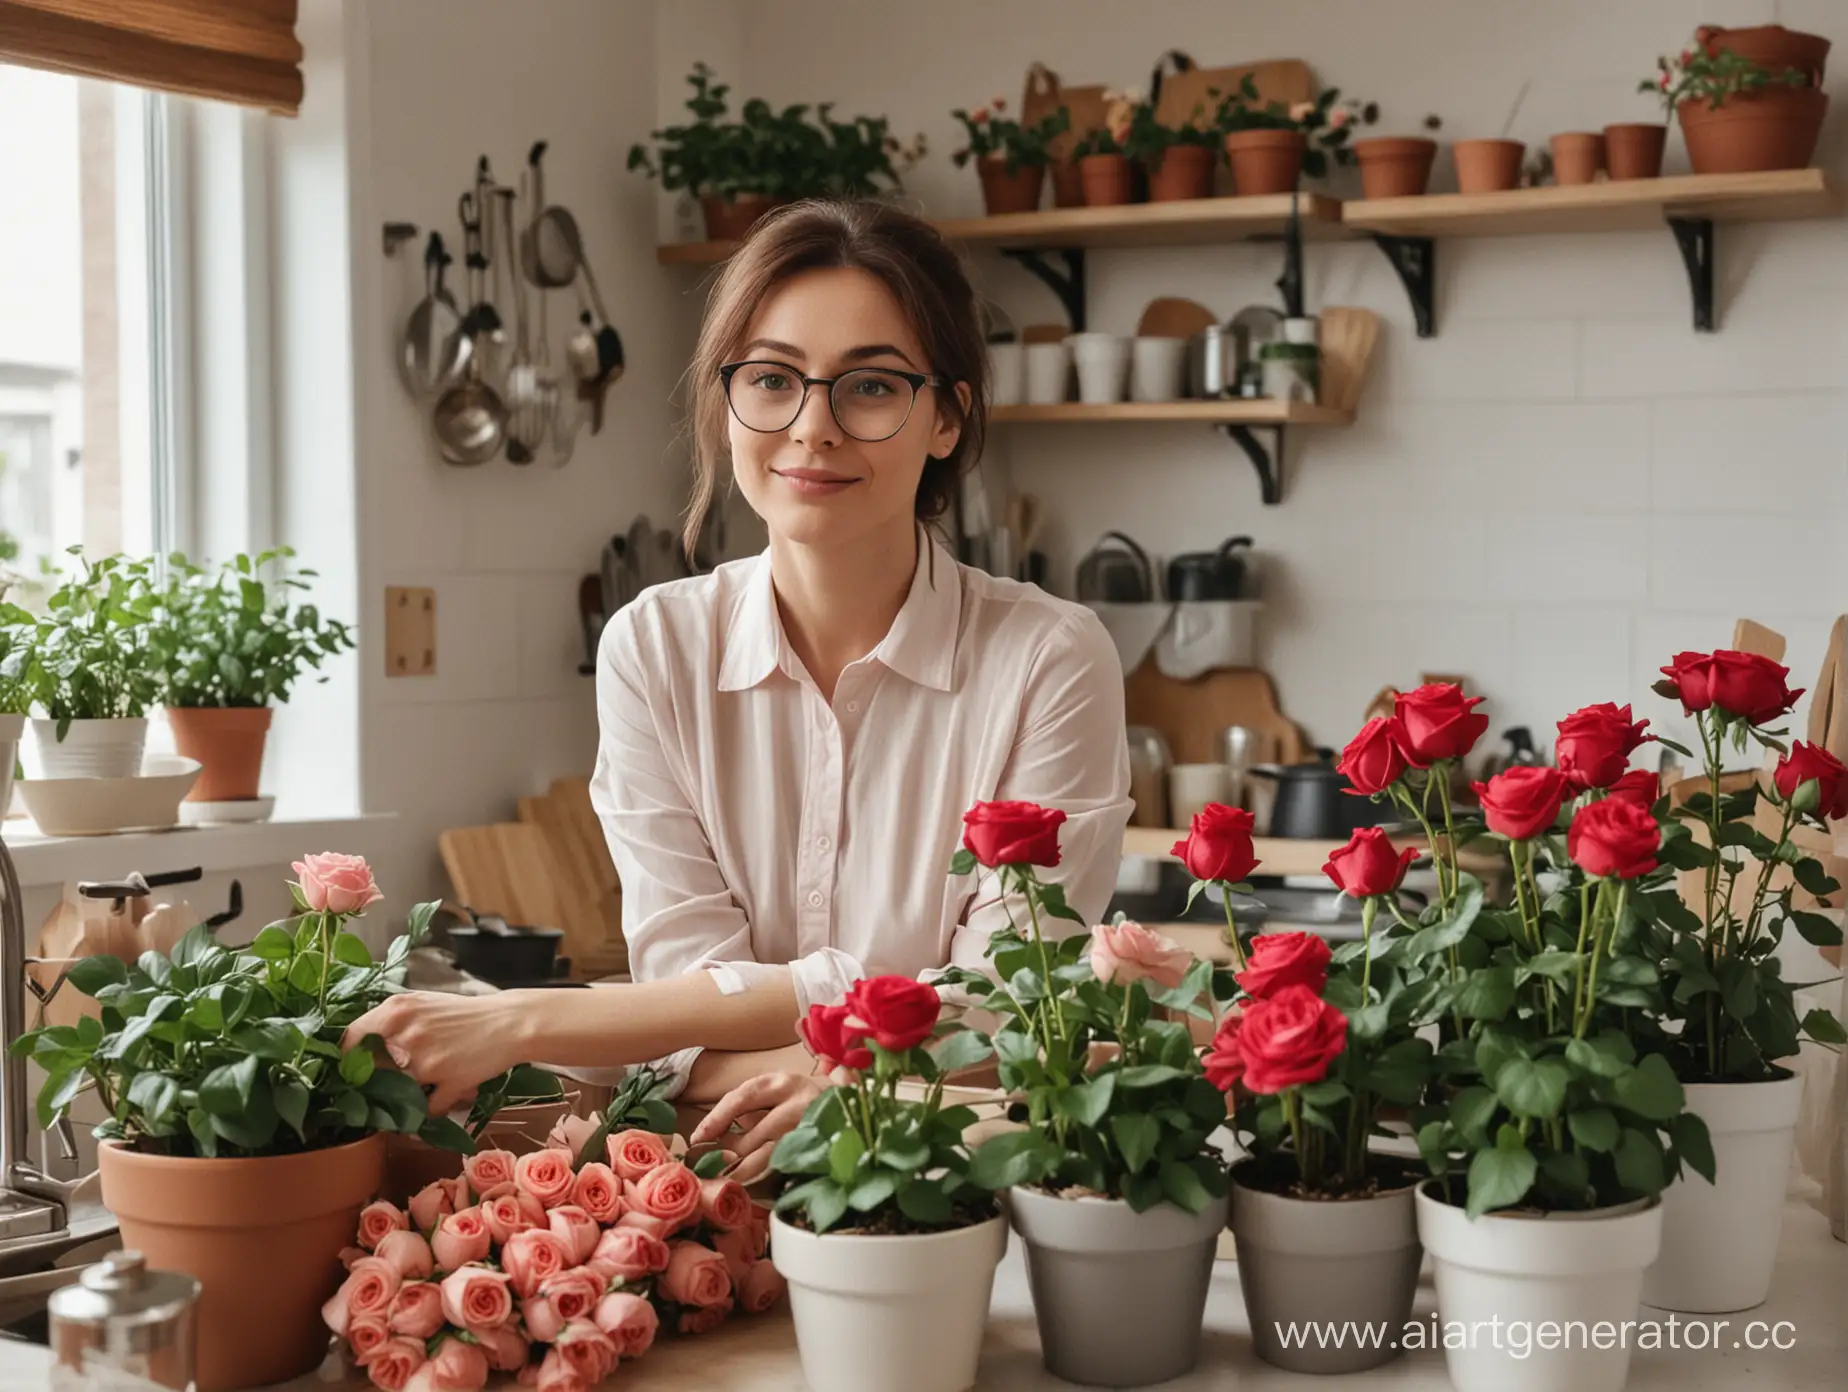 Woman-in-Glasses-Surrounded-by-Rosefilled-Flower-Pots-in-Kitchen